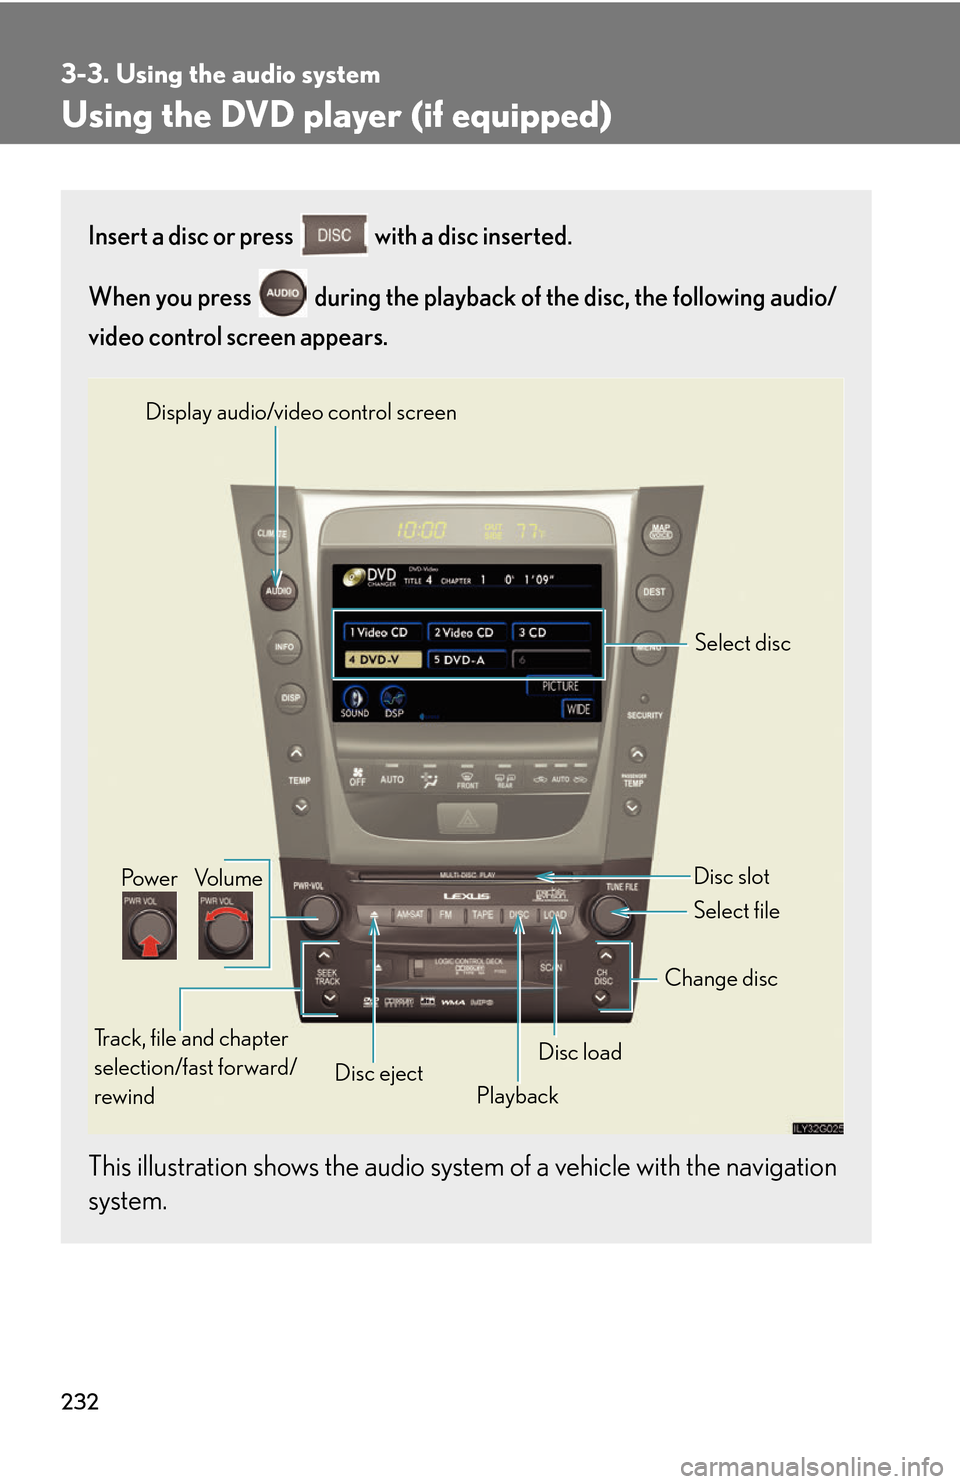 Lexus GS450h 2007  Using the hands-free system (for cellular phone) / LEXUS 2007 GS450H THROUGH JUNE 2006 PROD. OWNERS MANUAL (OM30727U) 232
3-3. Using the audio system
Using the DVD player (if equipped)
Insert a disc or press  with a disc inserted.
When you press   during the playback of the disc, the following audio/
video control